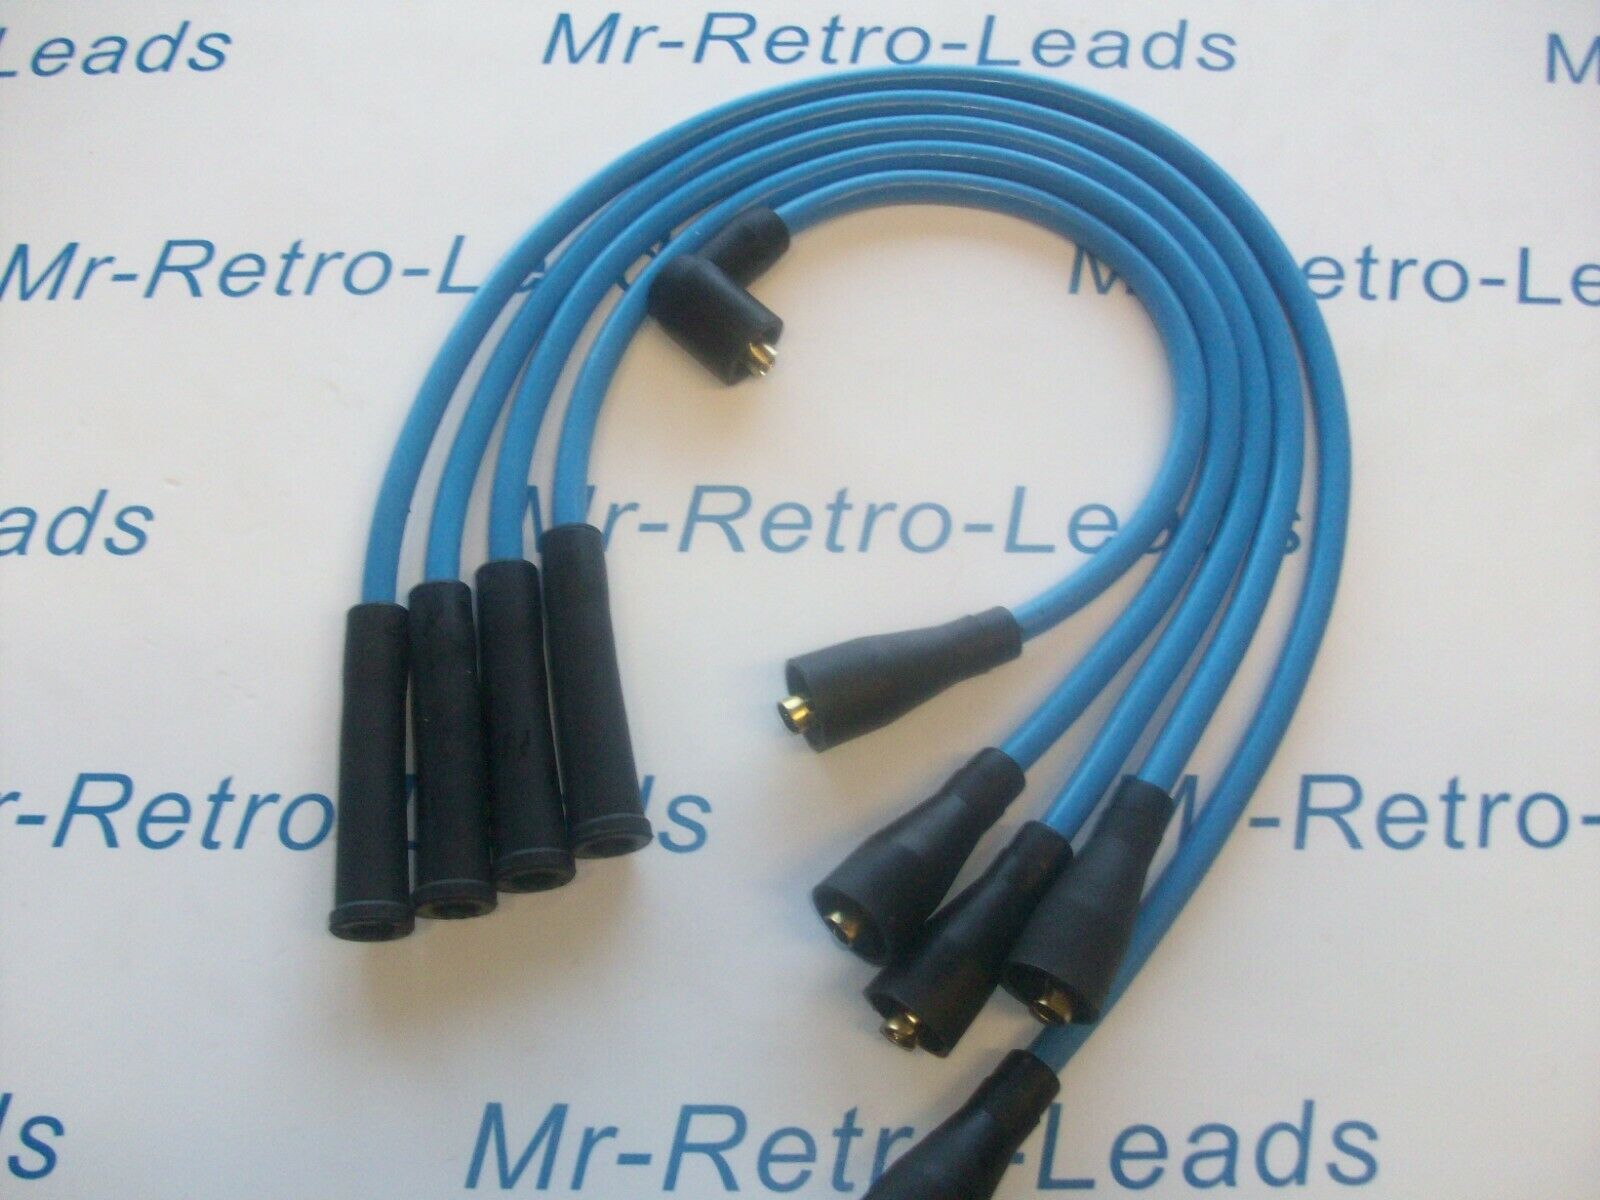 Light Blue 8mm Performance Ignition Leads Will Fit Ford Fiesta Mk1 950 1.1 Leads